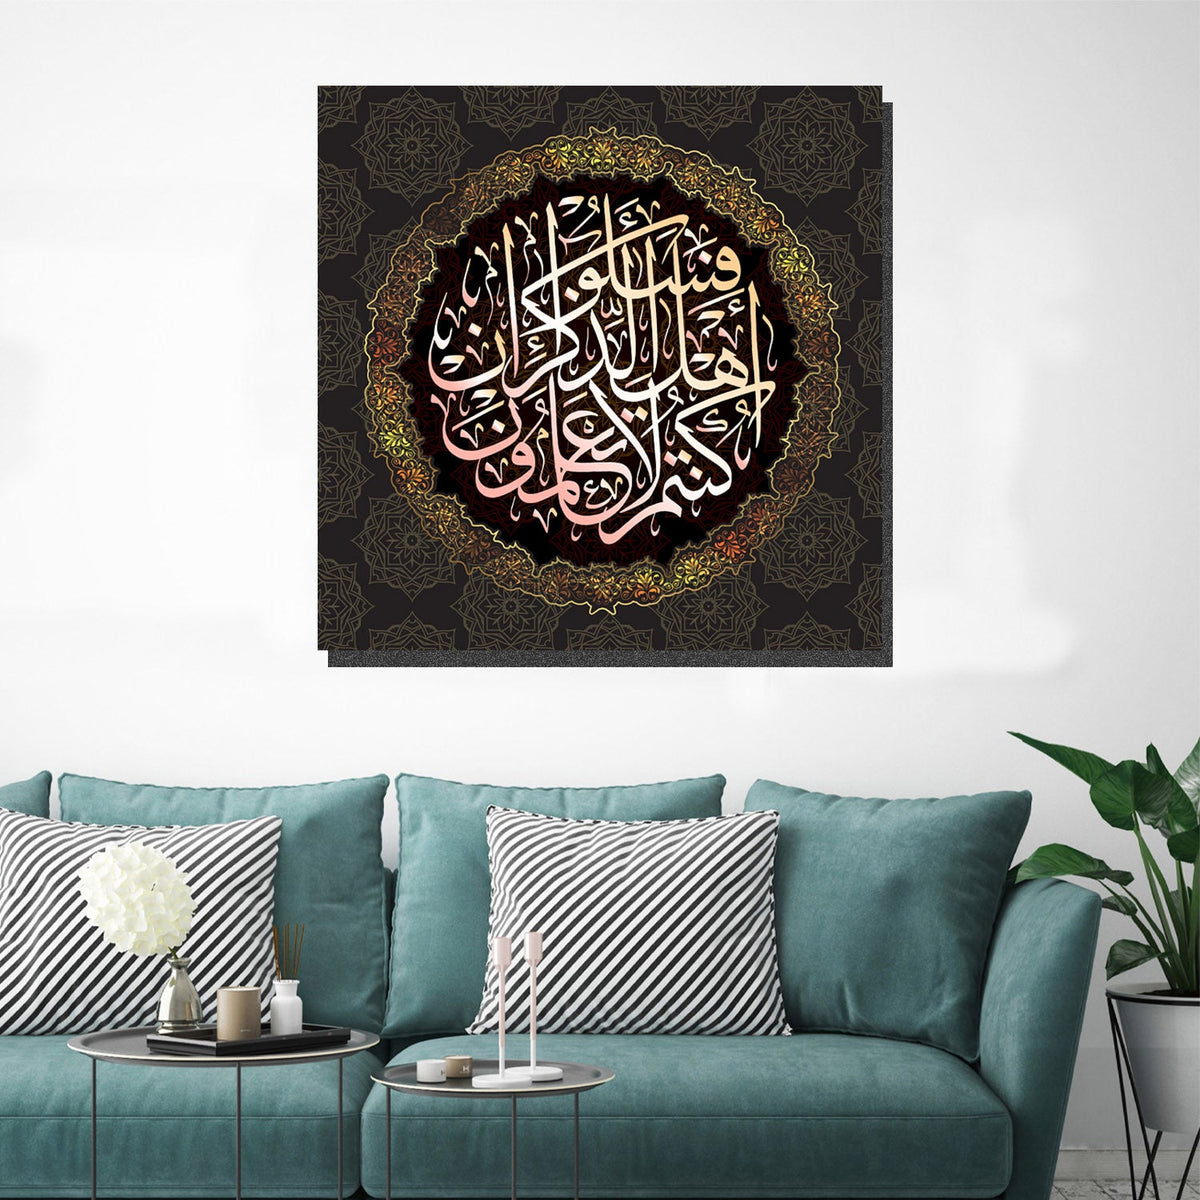 https://cdn.shopify.com/s/files/1/0387/9986/8044/products/IslamicArtLimitedEdition12CanvasArtprintStretched-4.jpg